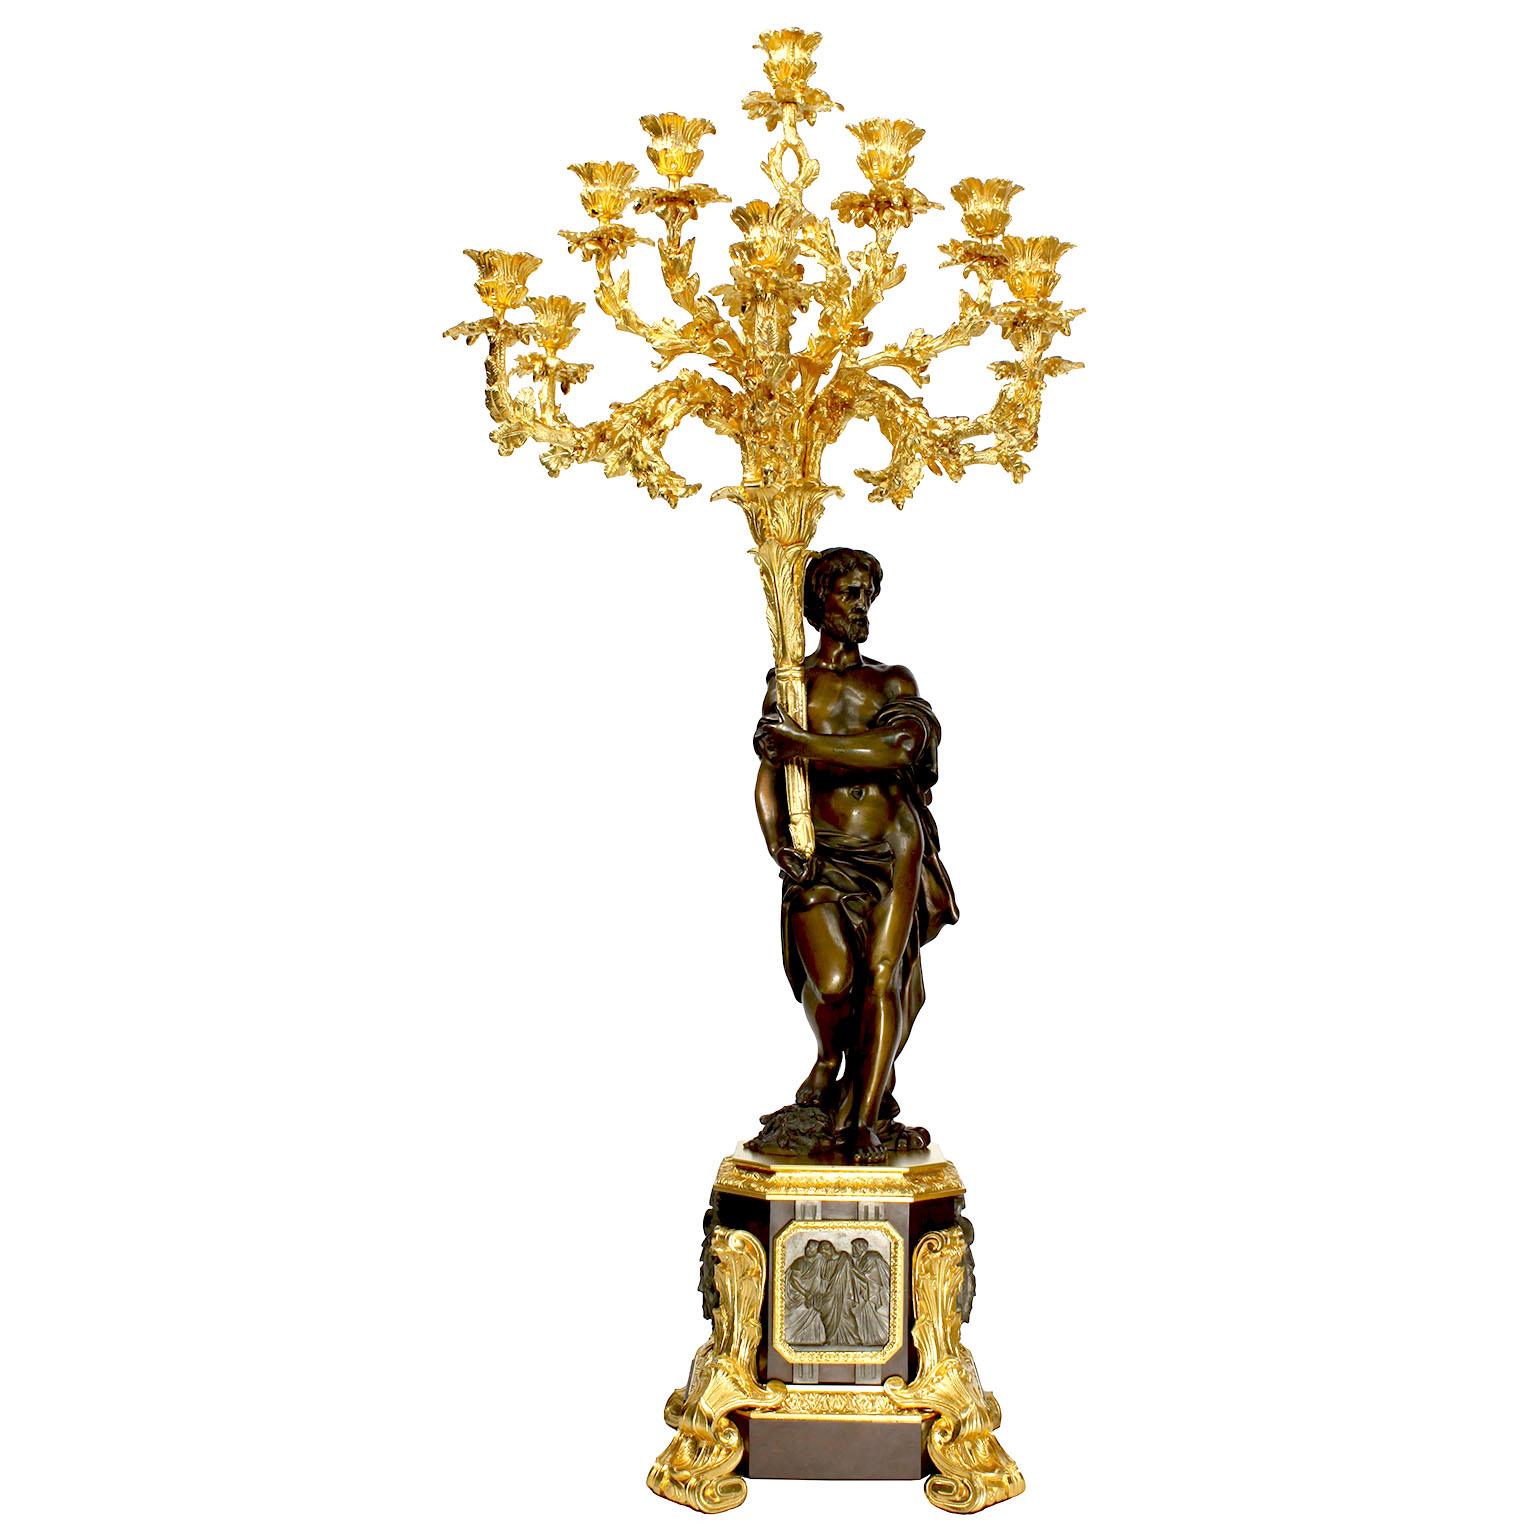 A very fine pair of French 19th century neoclassical Greco-Roman style patinanted bronze and ormolu mounted figural candelabra by Henri Picard (French, Active from 1831-1864). The large and impressive pair of ten-light candelabra, each with a